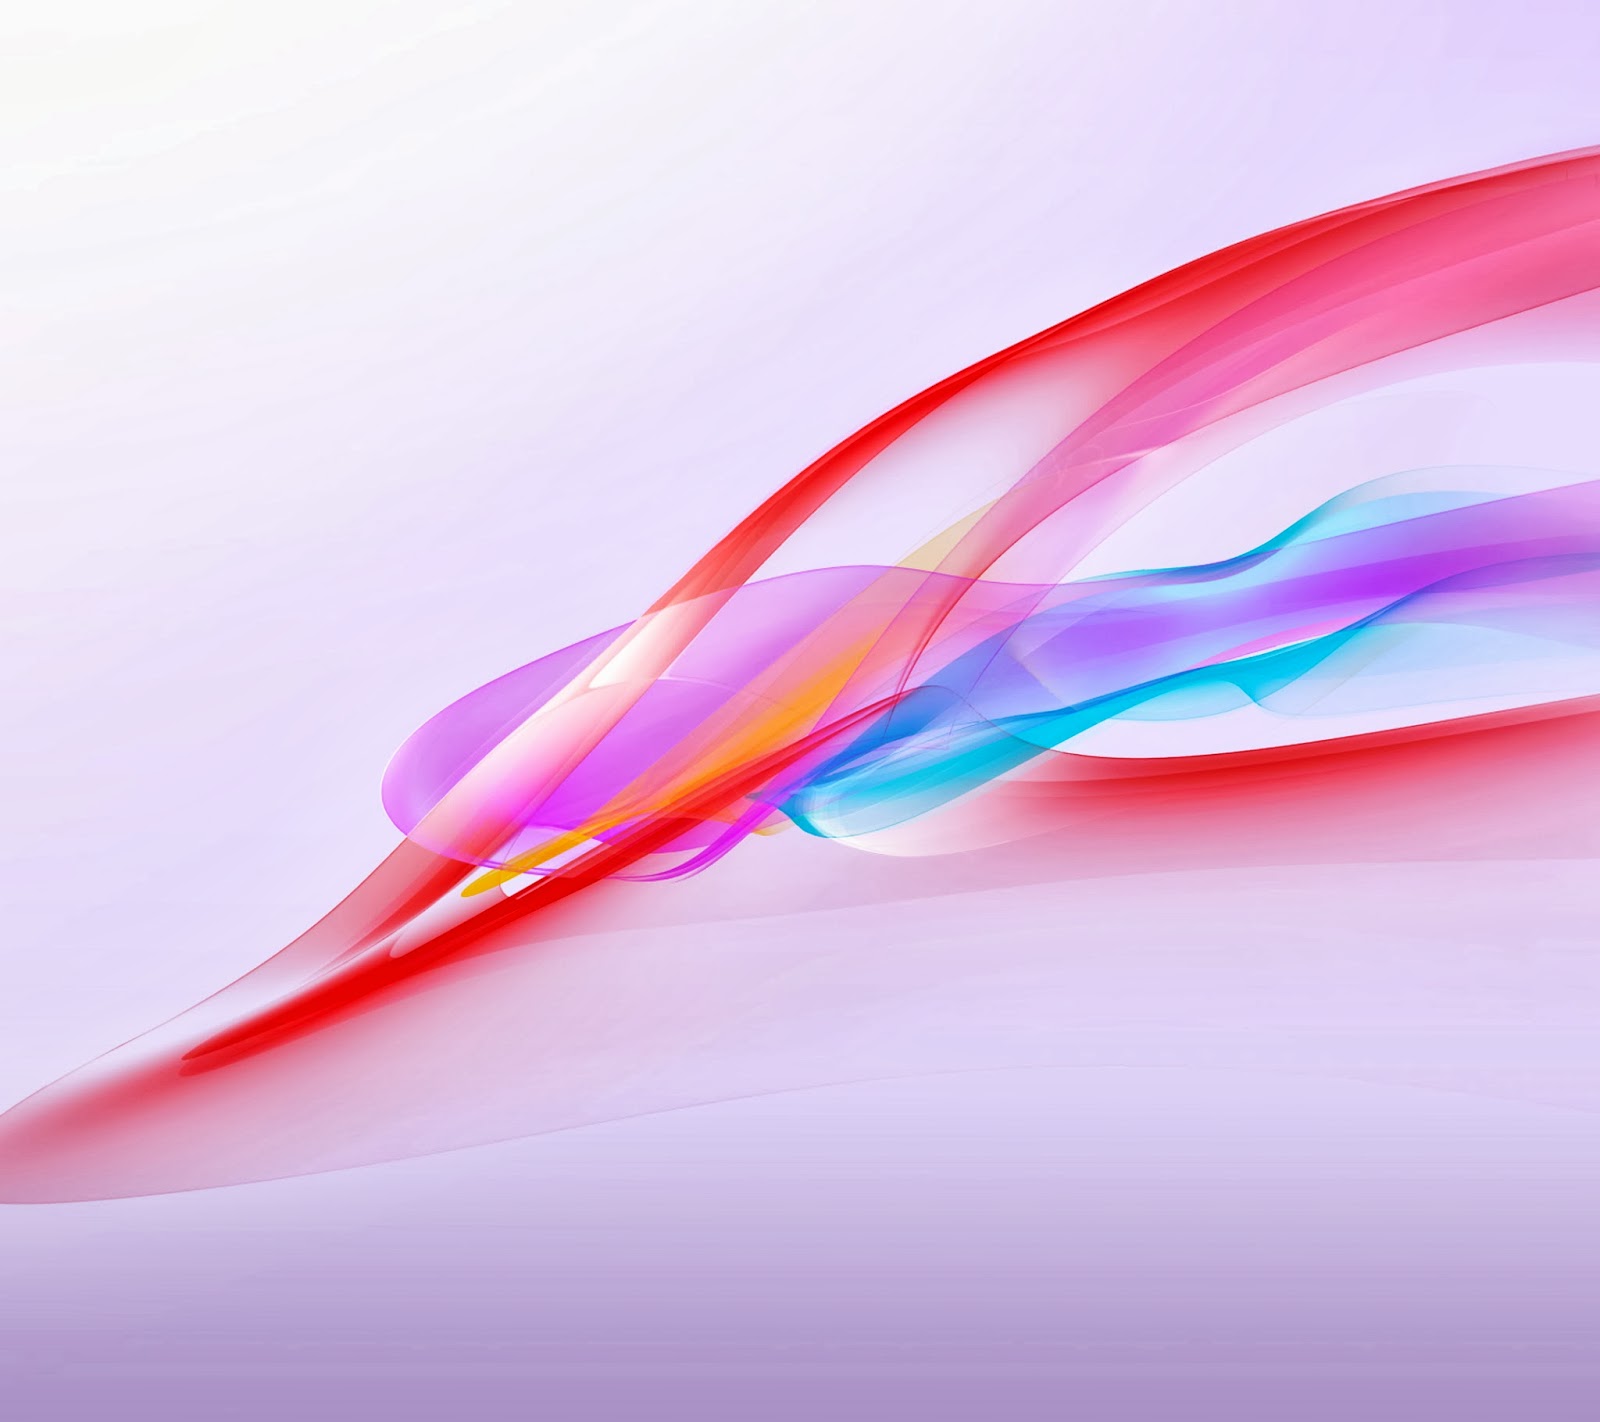 Download Xperia Z Ultra and Xperia Z1 Wallpapers | Amnay Technology